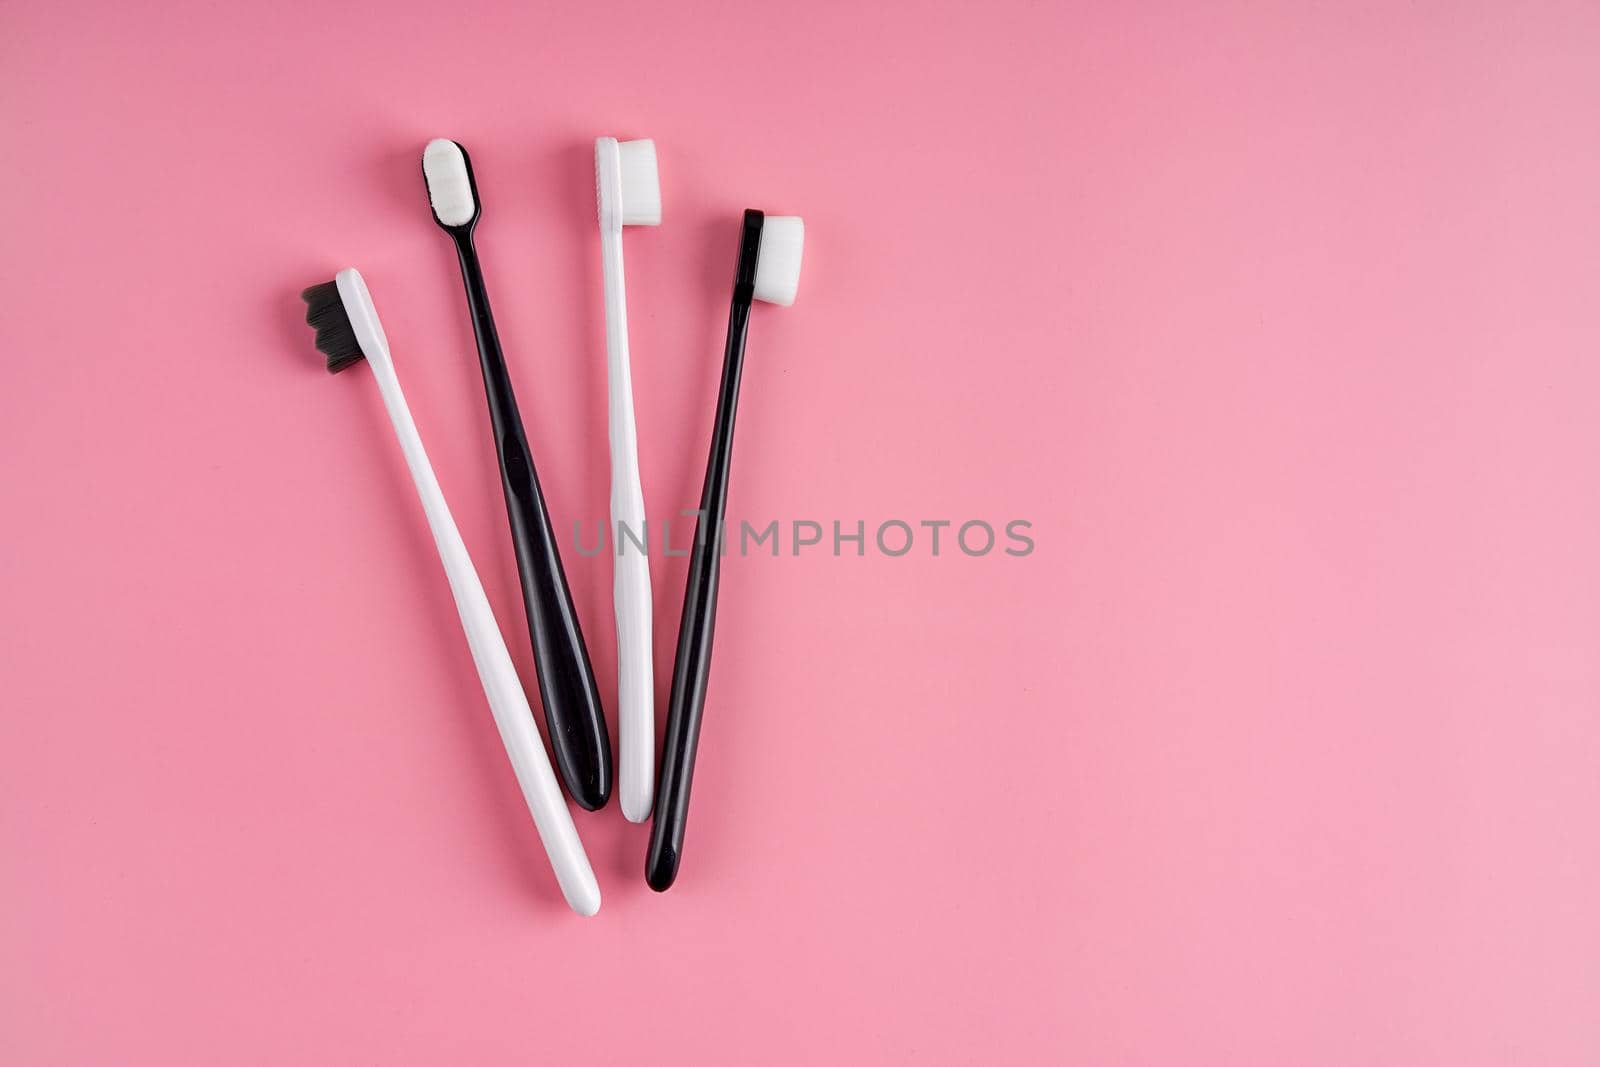 Fashionable toothbrush with soft bristles. Popular toothbrushes. Hygiene trends. Kit of toothbrushes on pink background.